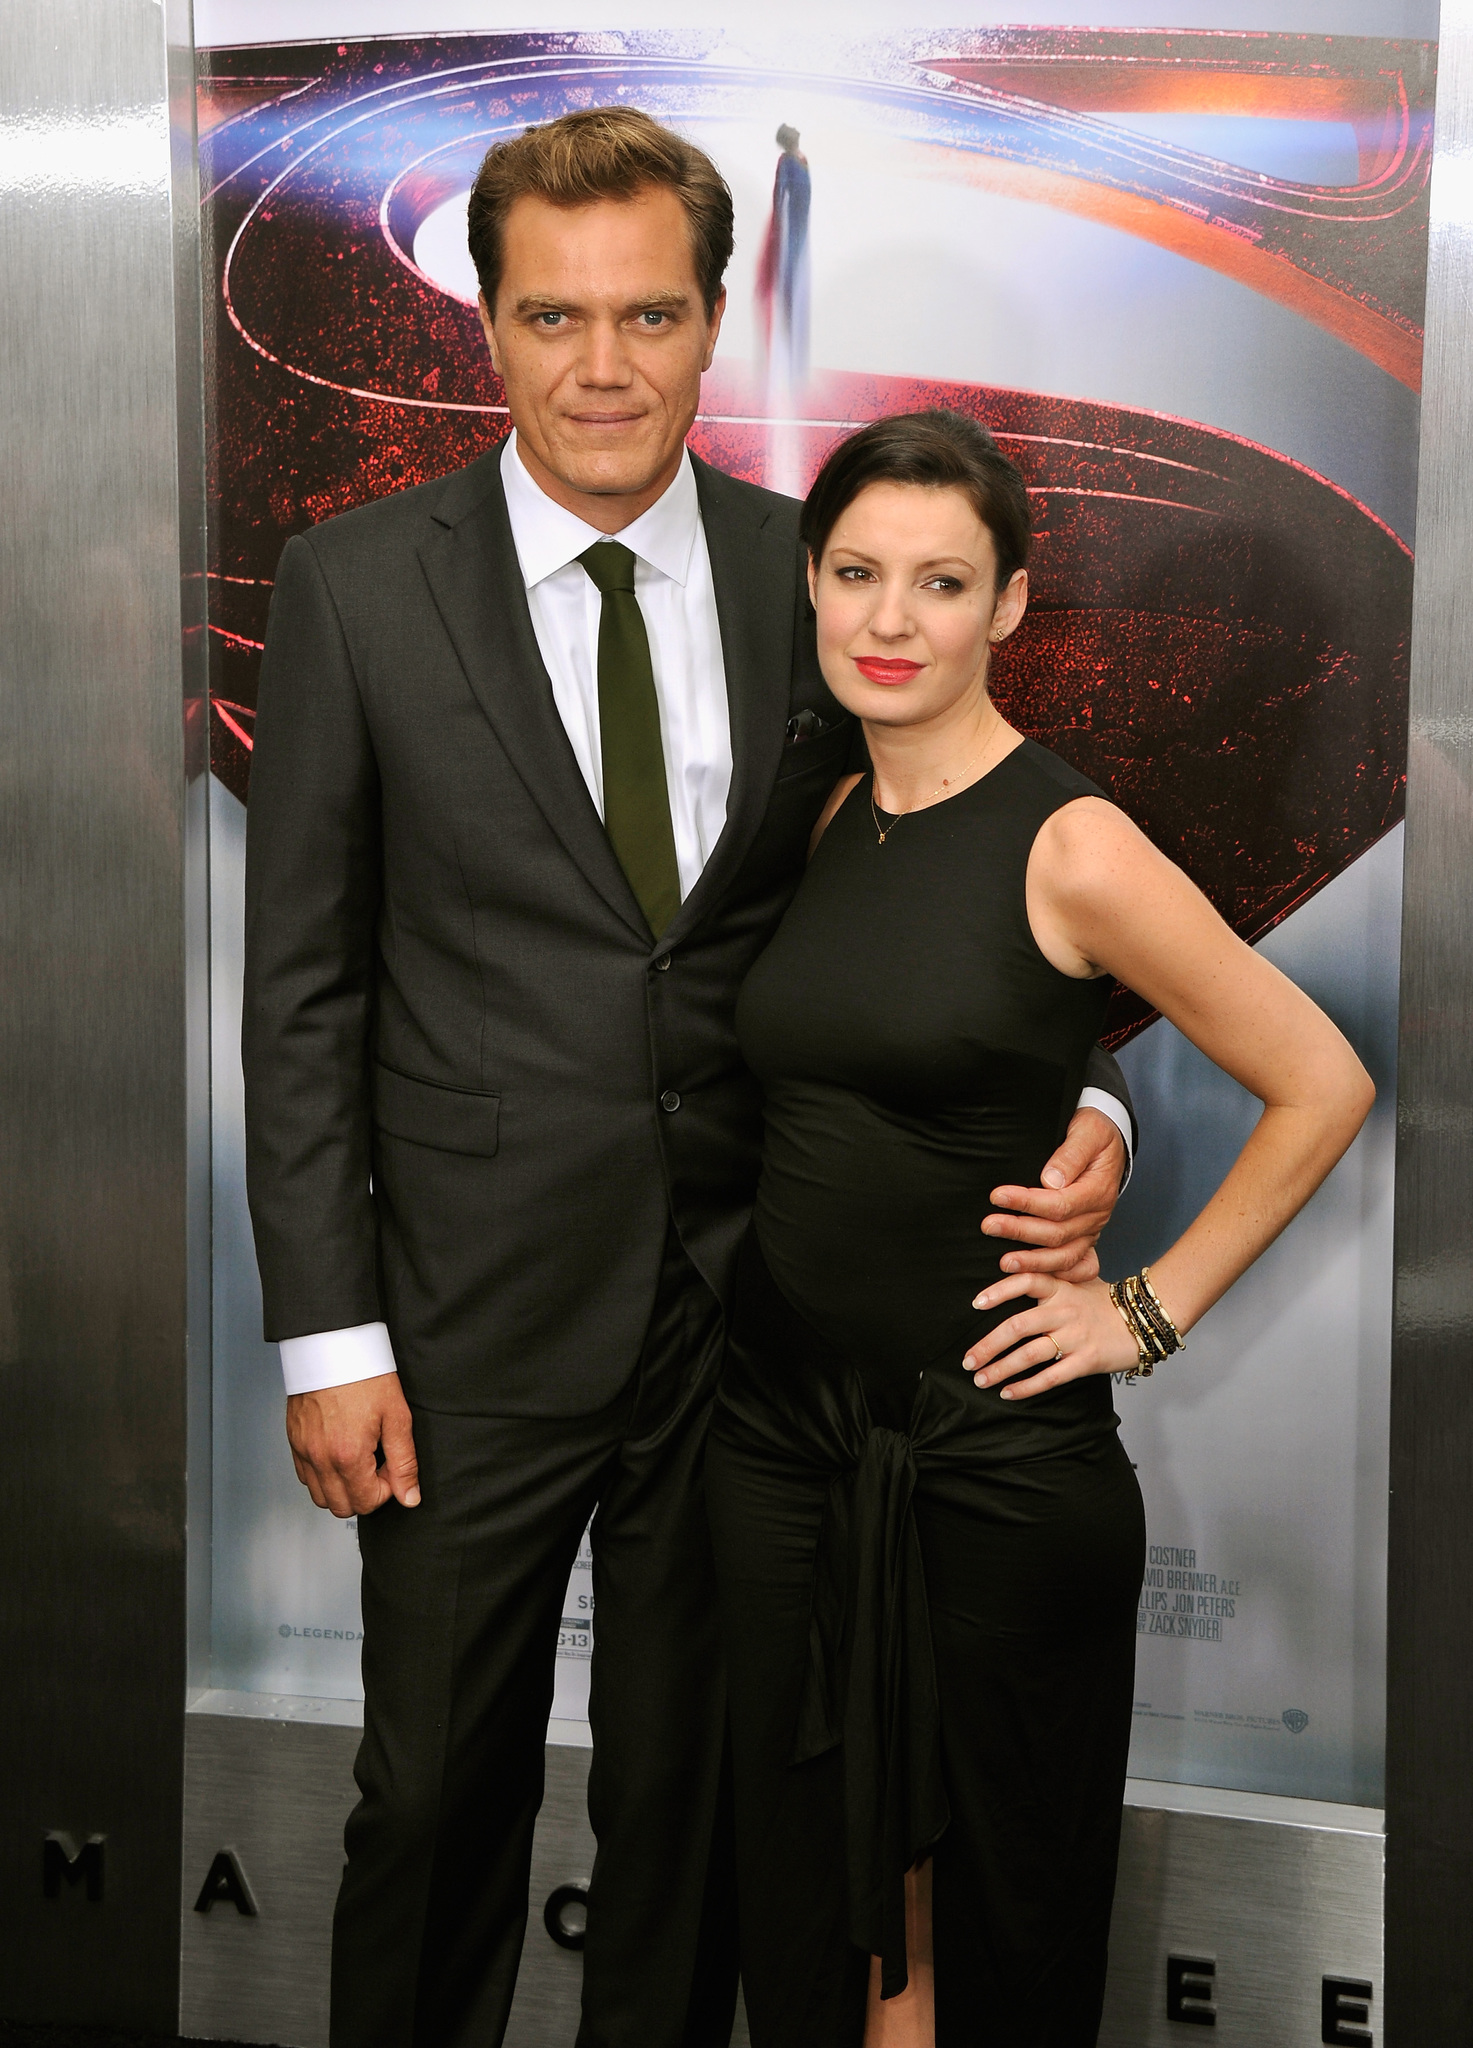 Michael Shannon and Kate Arrington at event of Zmogus is plieno (2013)